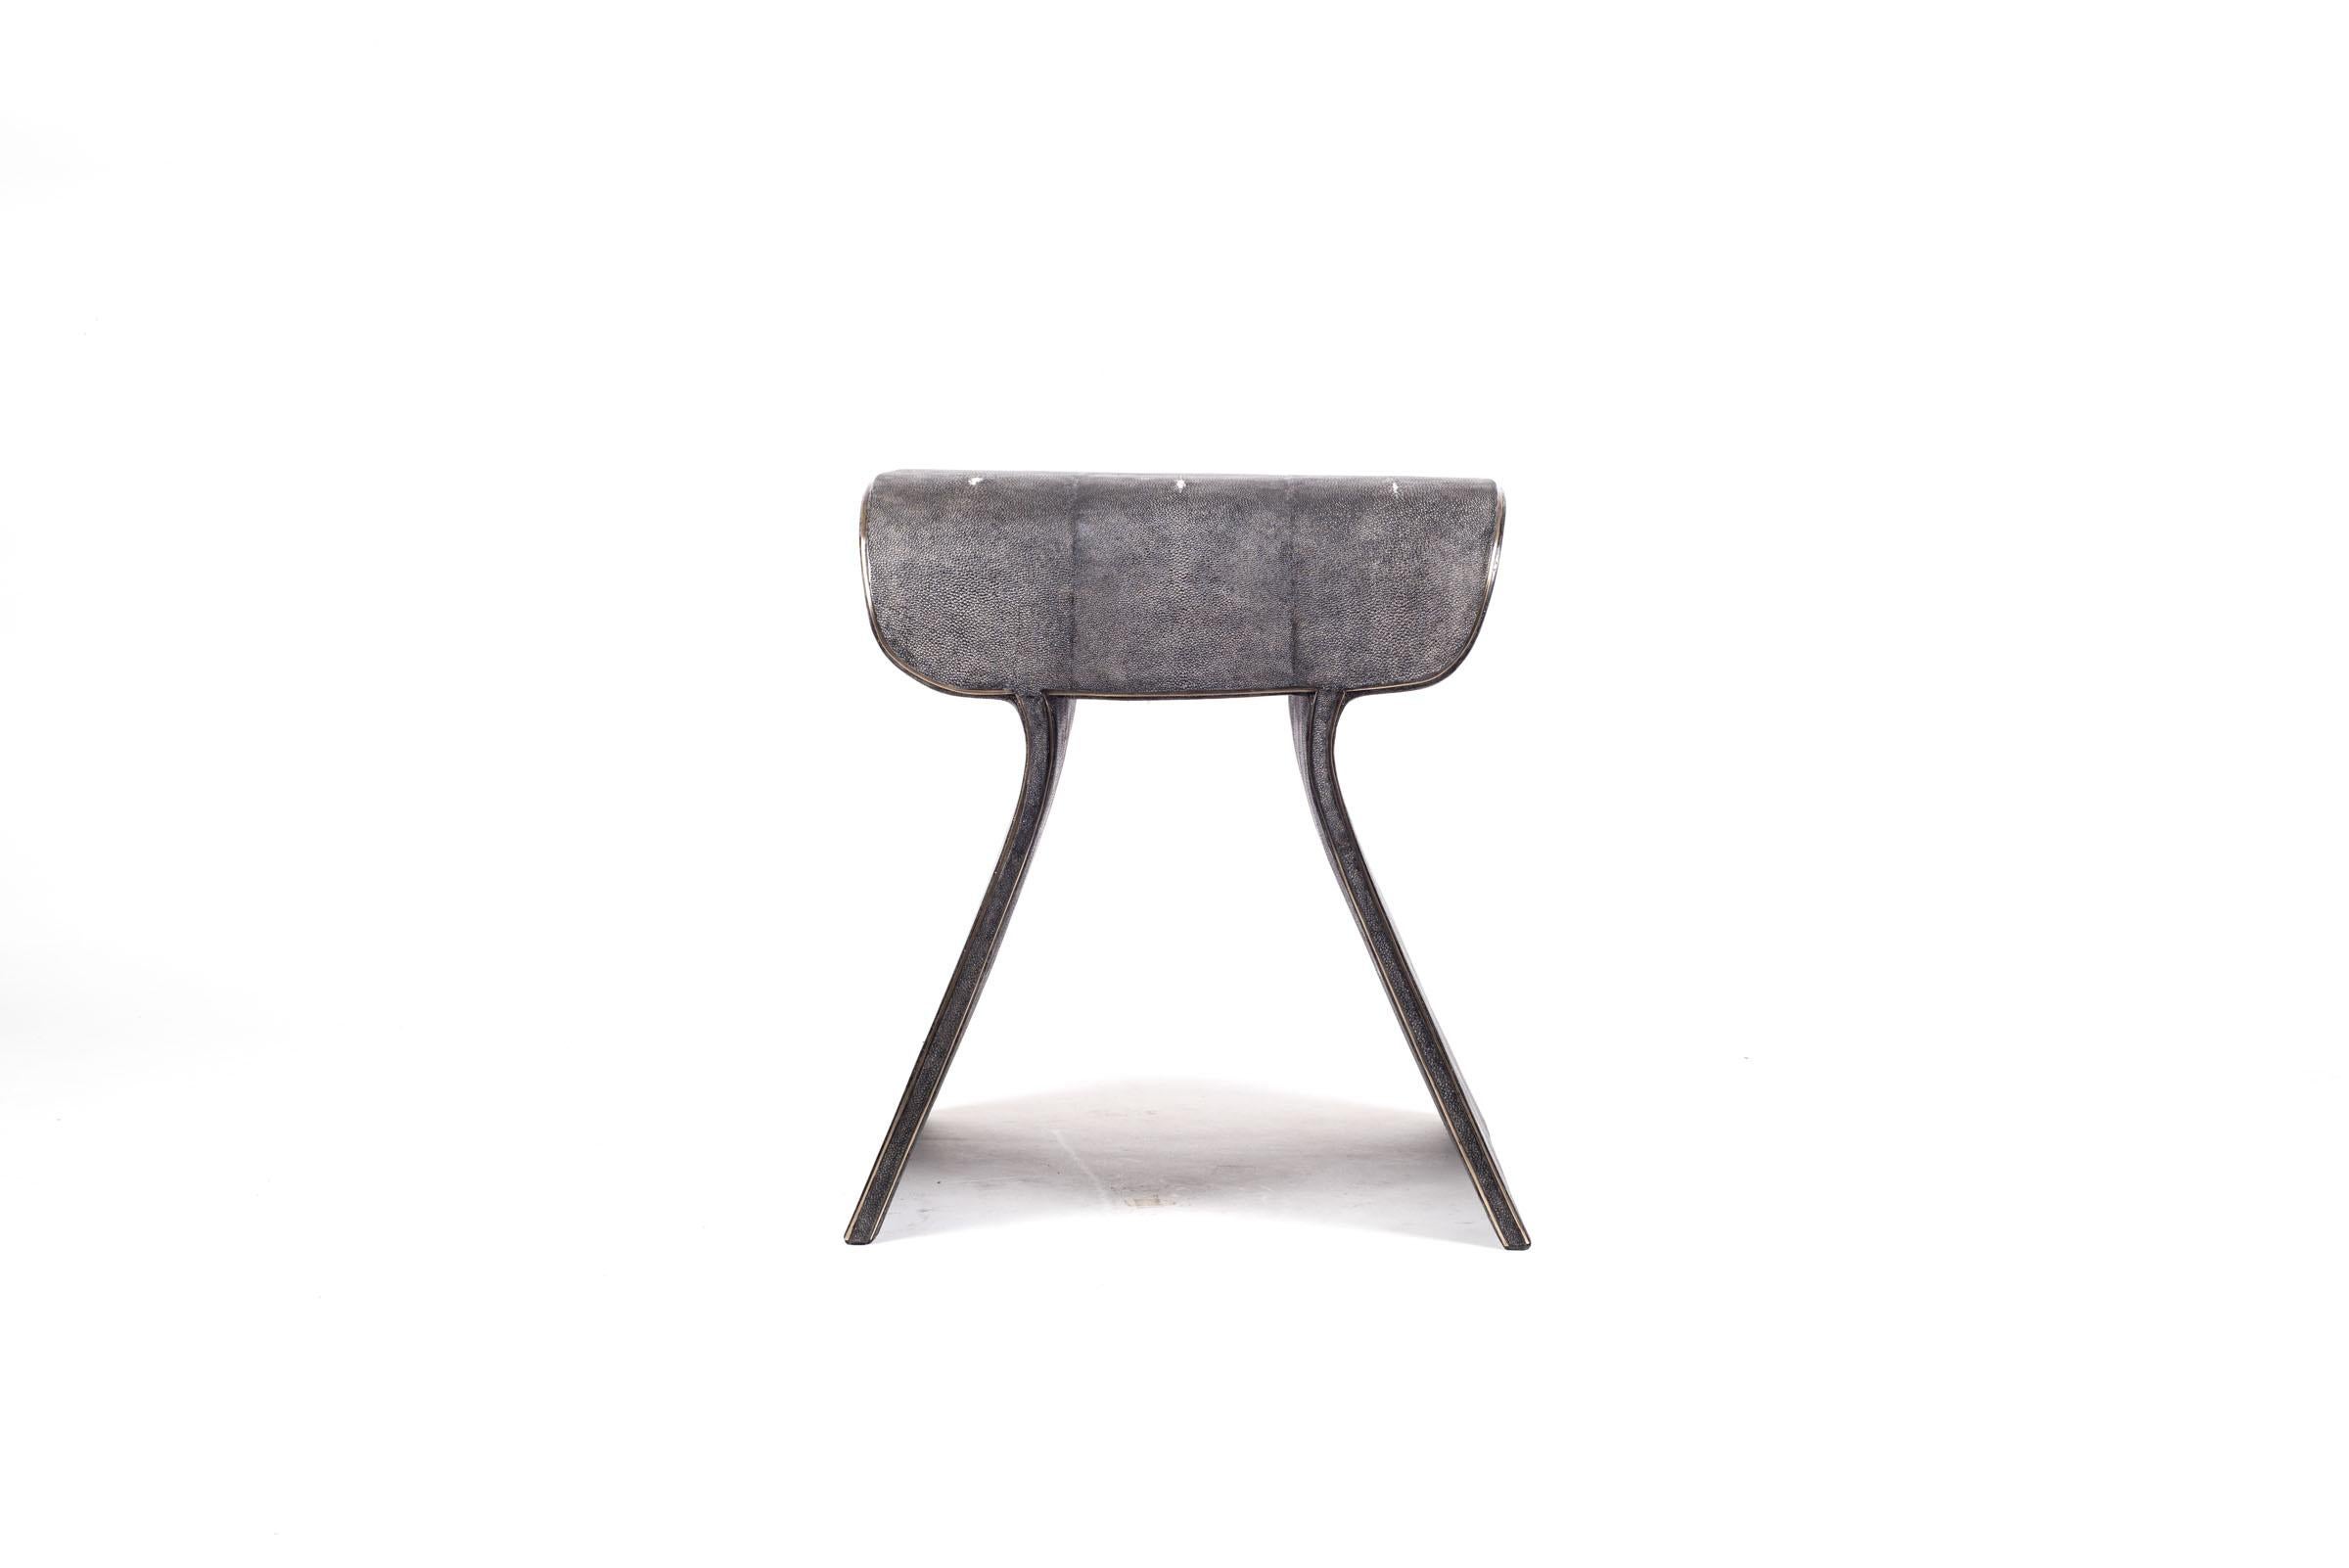 Dandy Stool Upholstered in Cream Fur & Bronze-Patina Brass Details by Kifu Paris For Sale 3